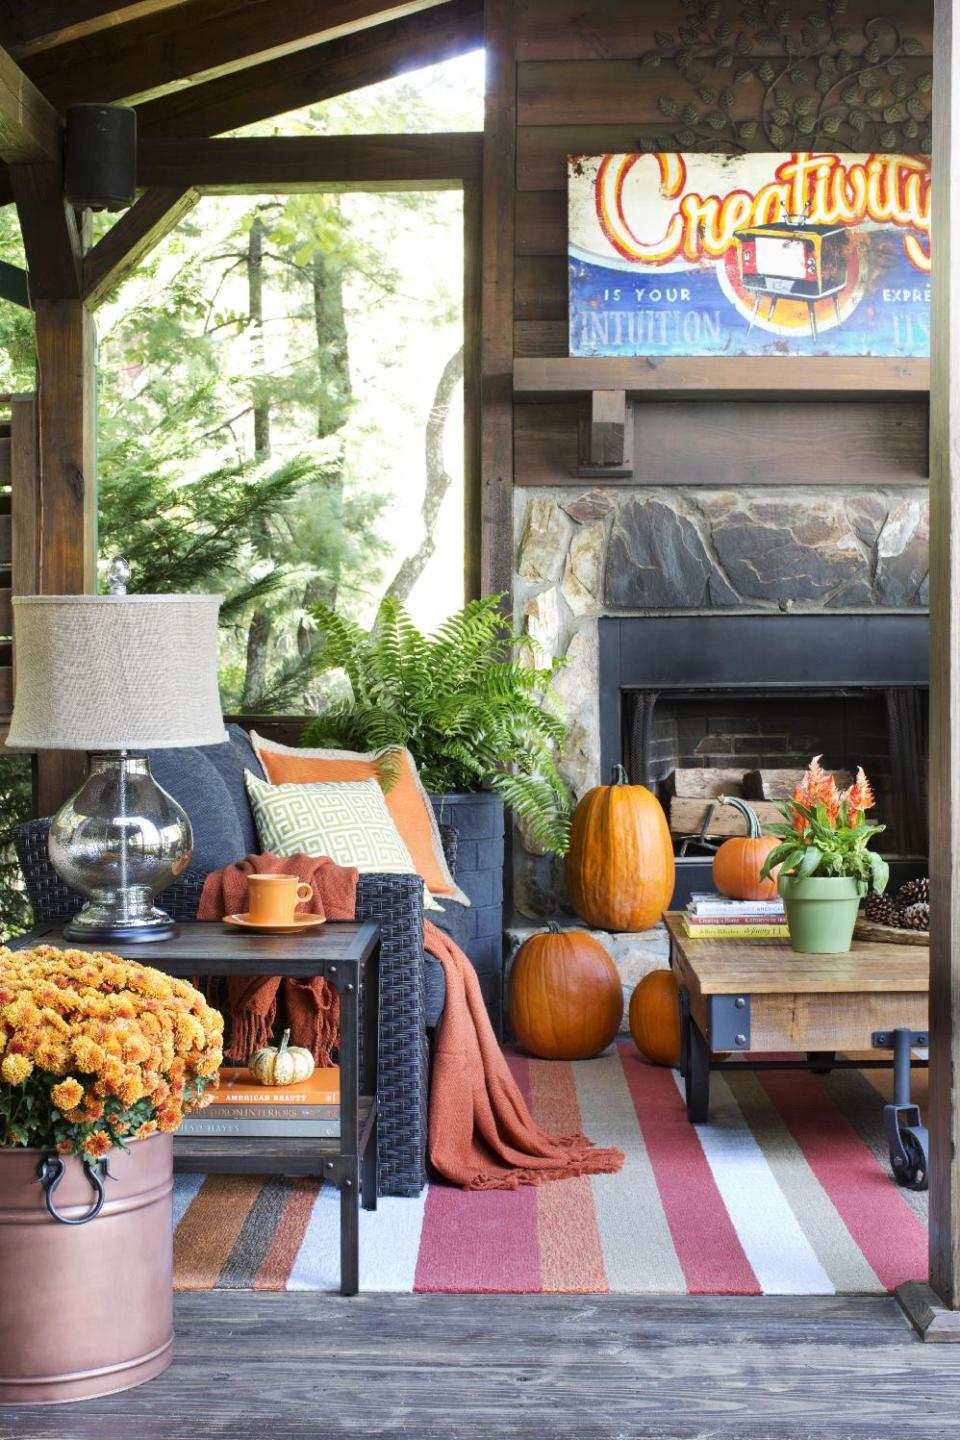 In this undated photo provided by Brian Patrick Flynn and Hayneedle.com, to ensure the outdoor living space of his mountain house stays warm and welcoming during the colder months, designer Brian Patrick Flynn chose woven blend upholstery for his seating, a wool and acrylic blend indoor-outdoor area rug, and throw pillows and blankets to keep guests feeling cozy. The wood burning fireplace is energy efficient and will still keep the area warm should electricity be lost during ice storms or snow storms. (AP Photo/Brian Patrick Flynn, Hayneedle.com)